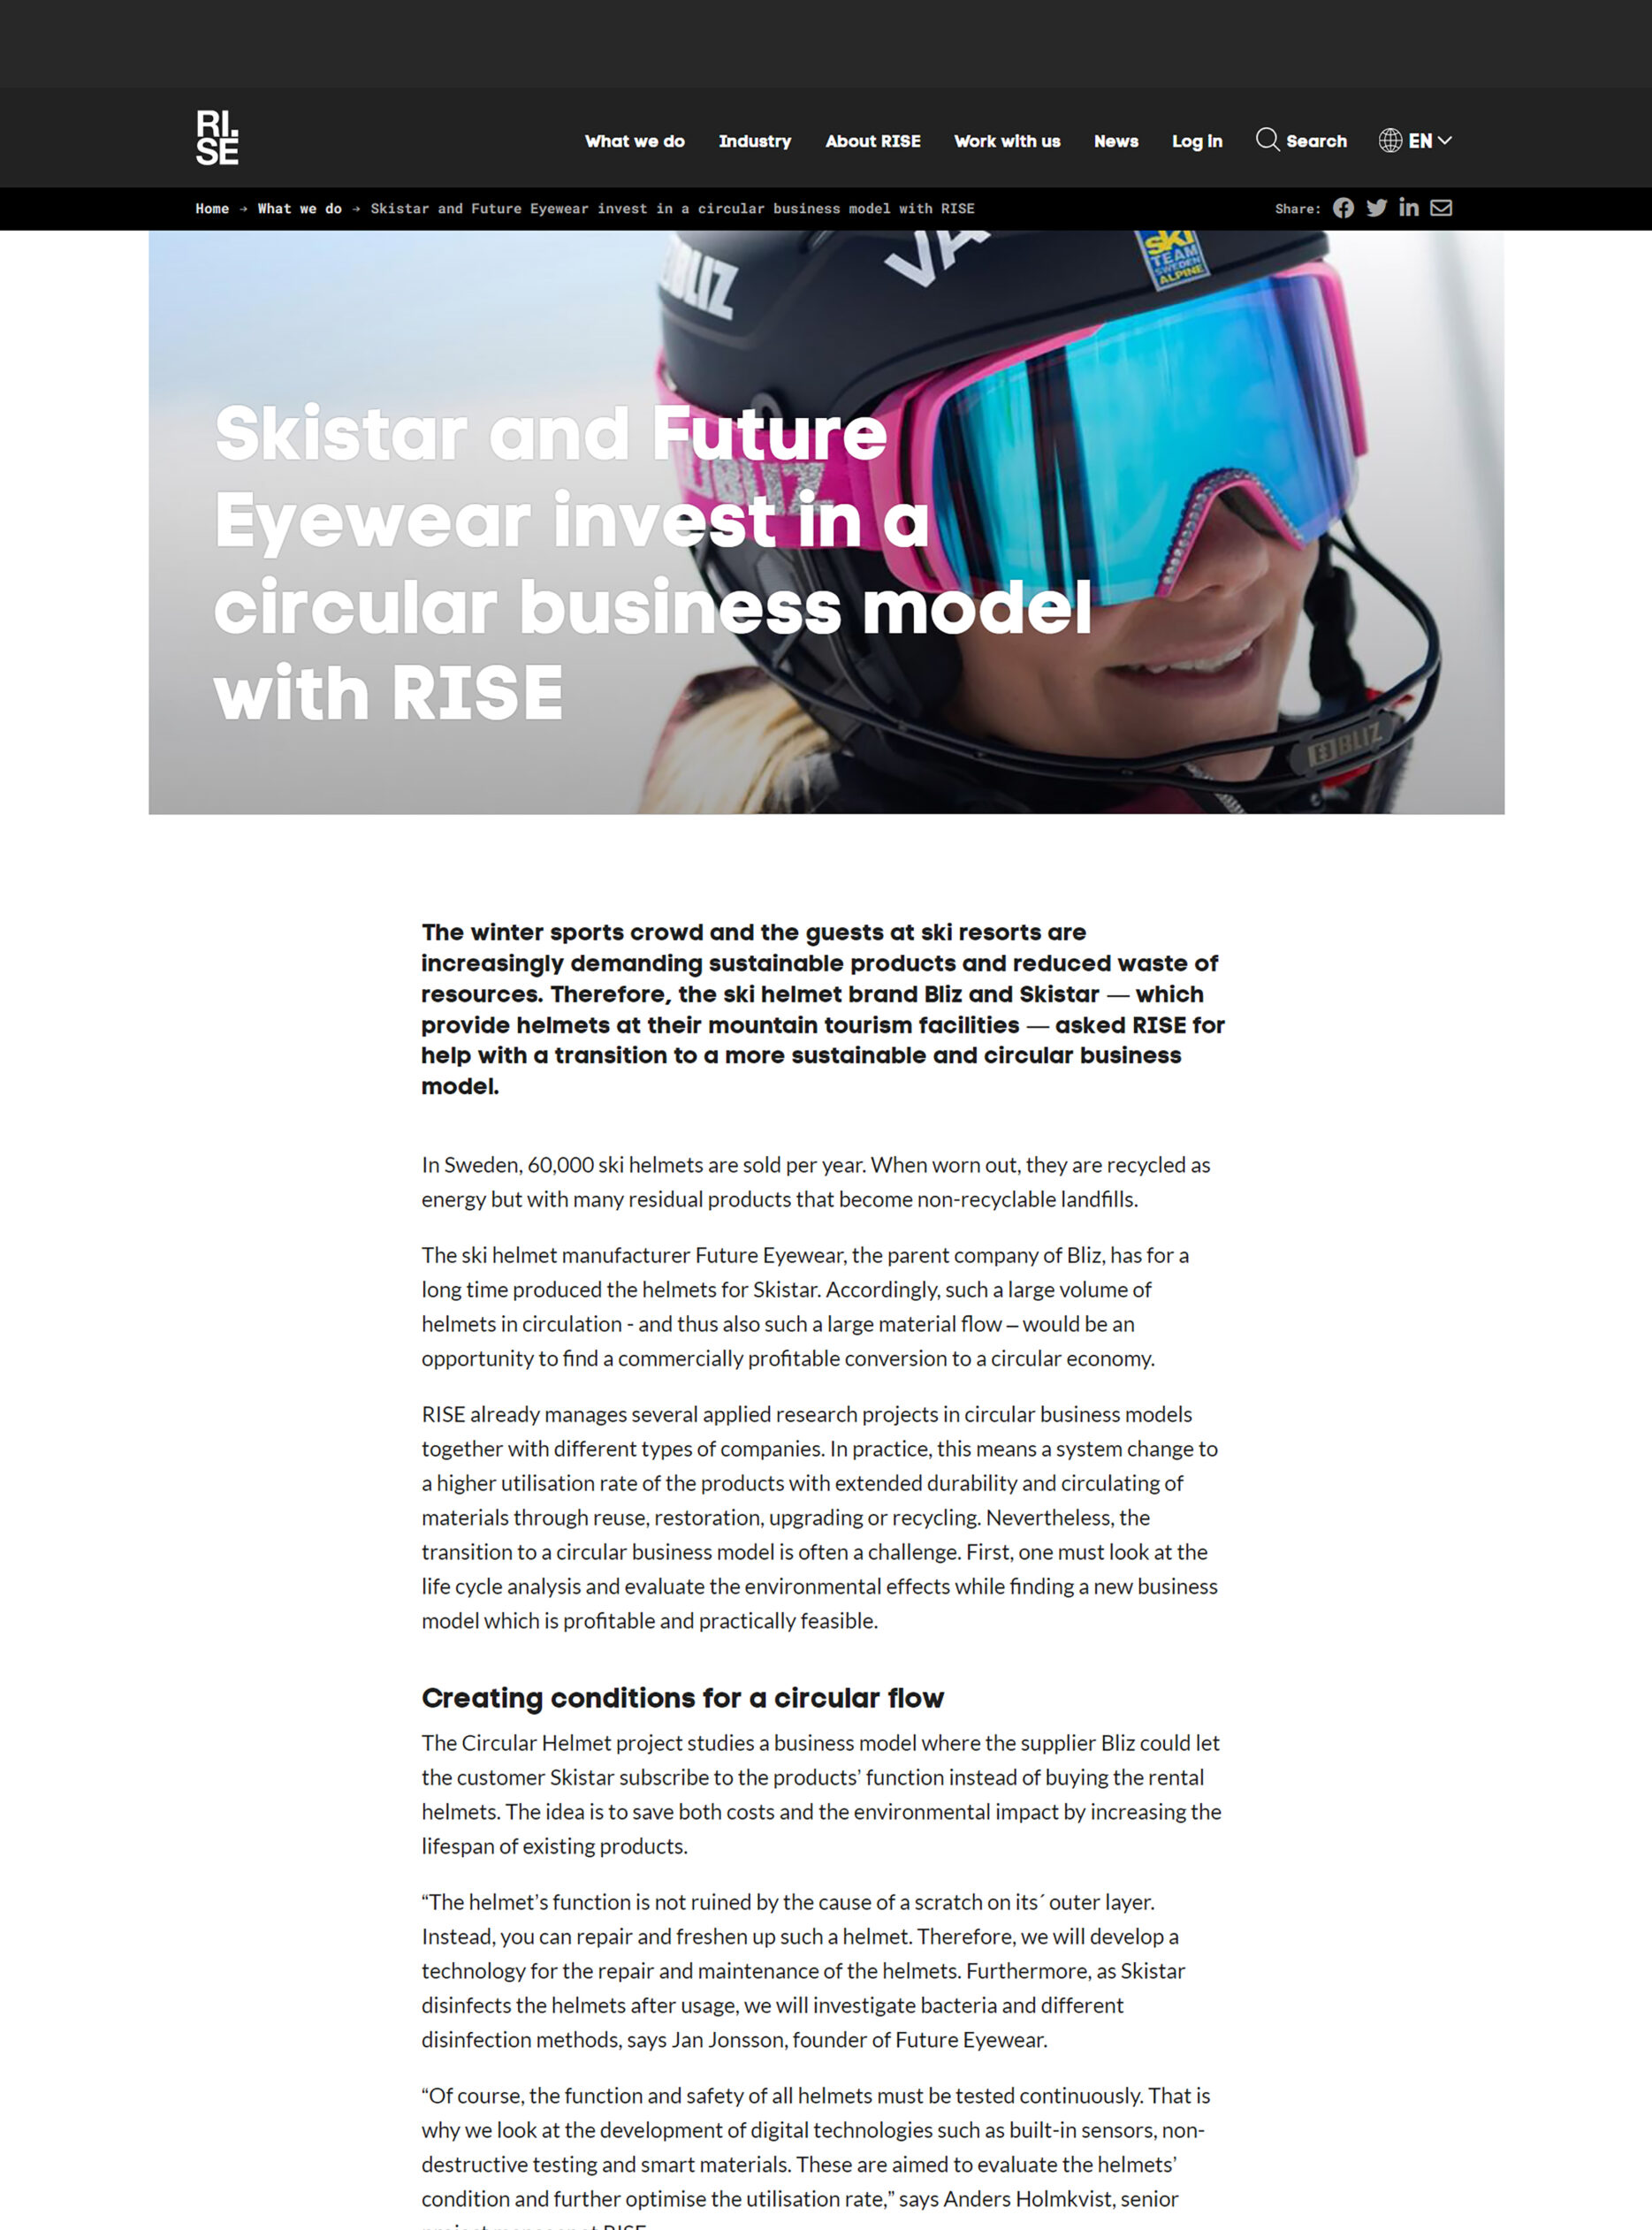 screencapture-ri-se-en-our-stories-skistar-and-future-eyewear-invest-in-a-circular-business-model-with-rise-2023-03-24-15_18_58 kopiera